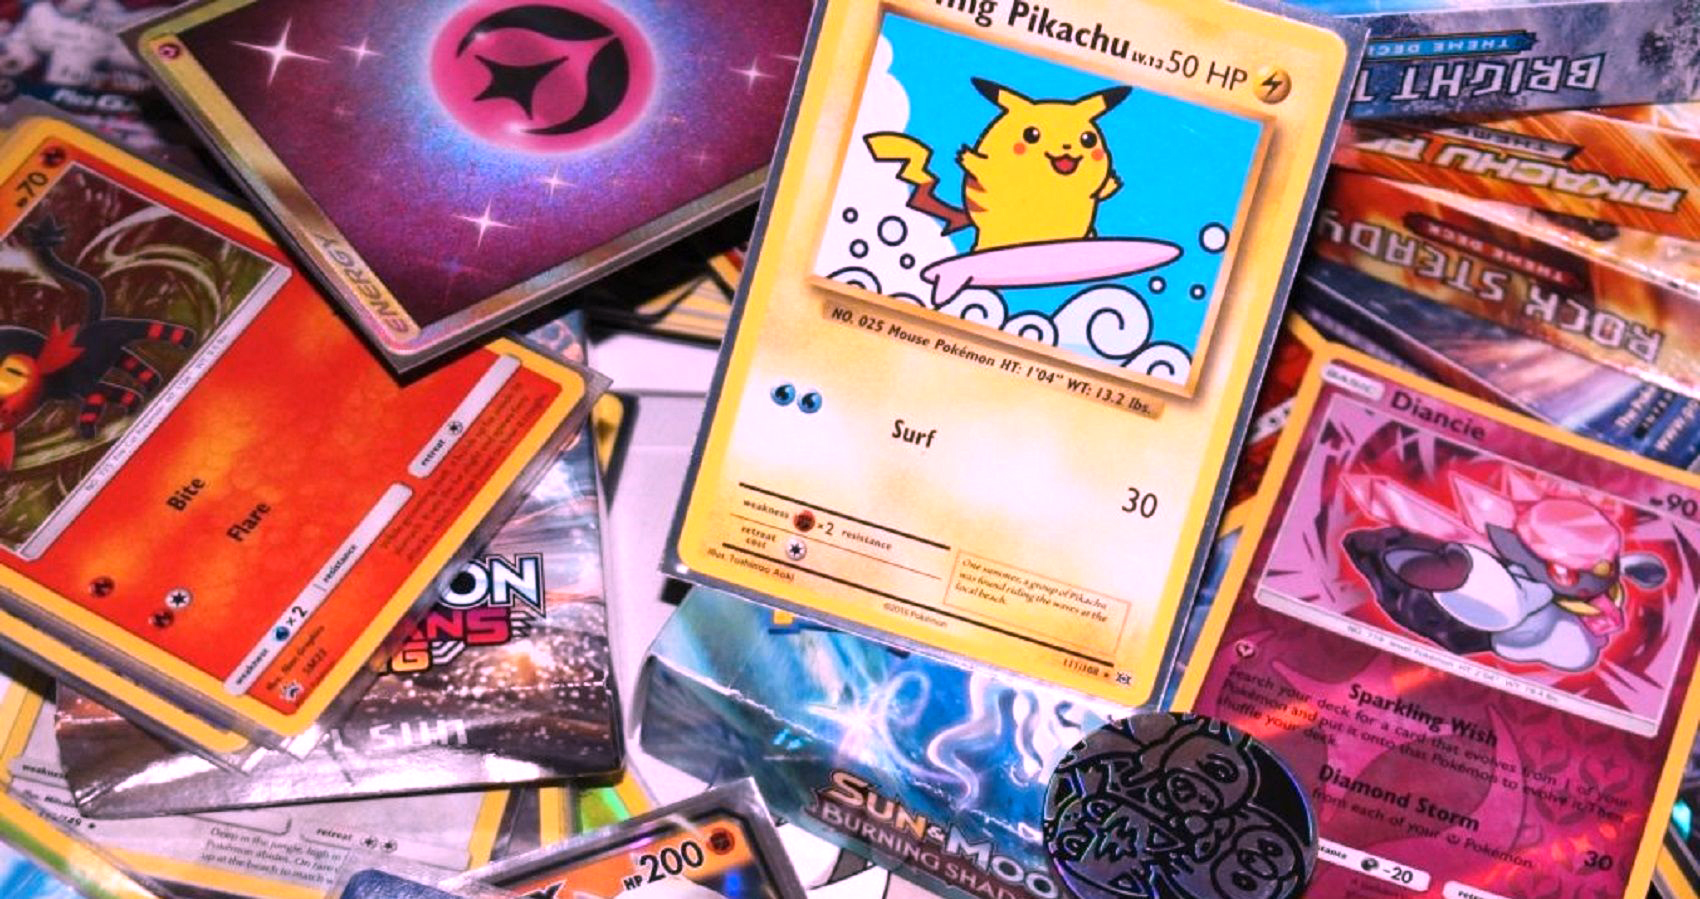 History of Pokemon and craze with rare Japanese Pokemon cards